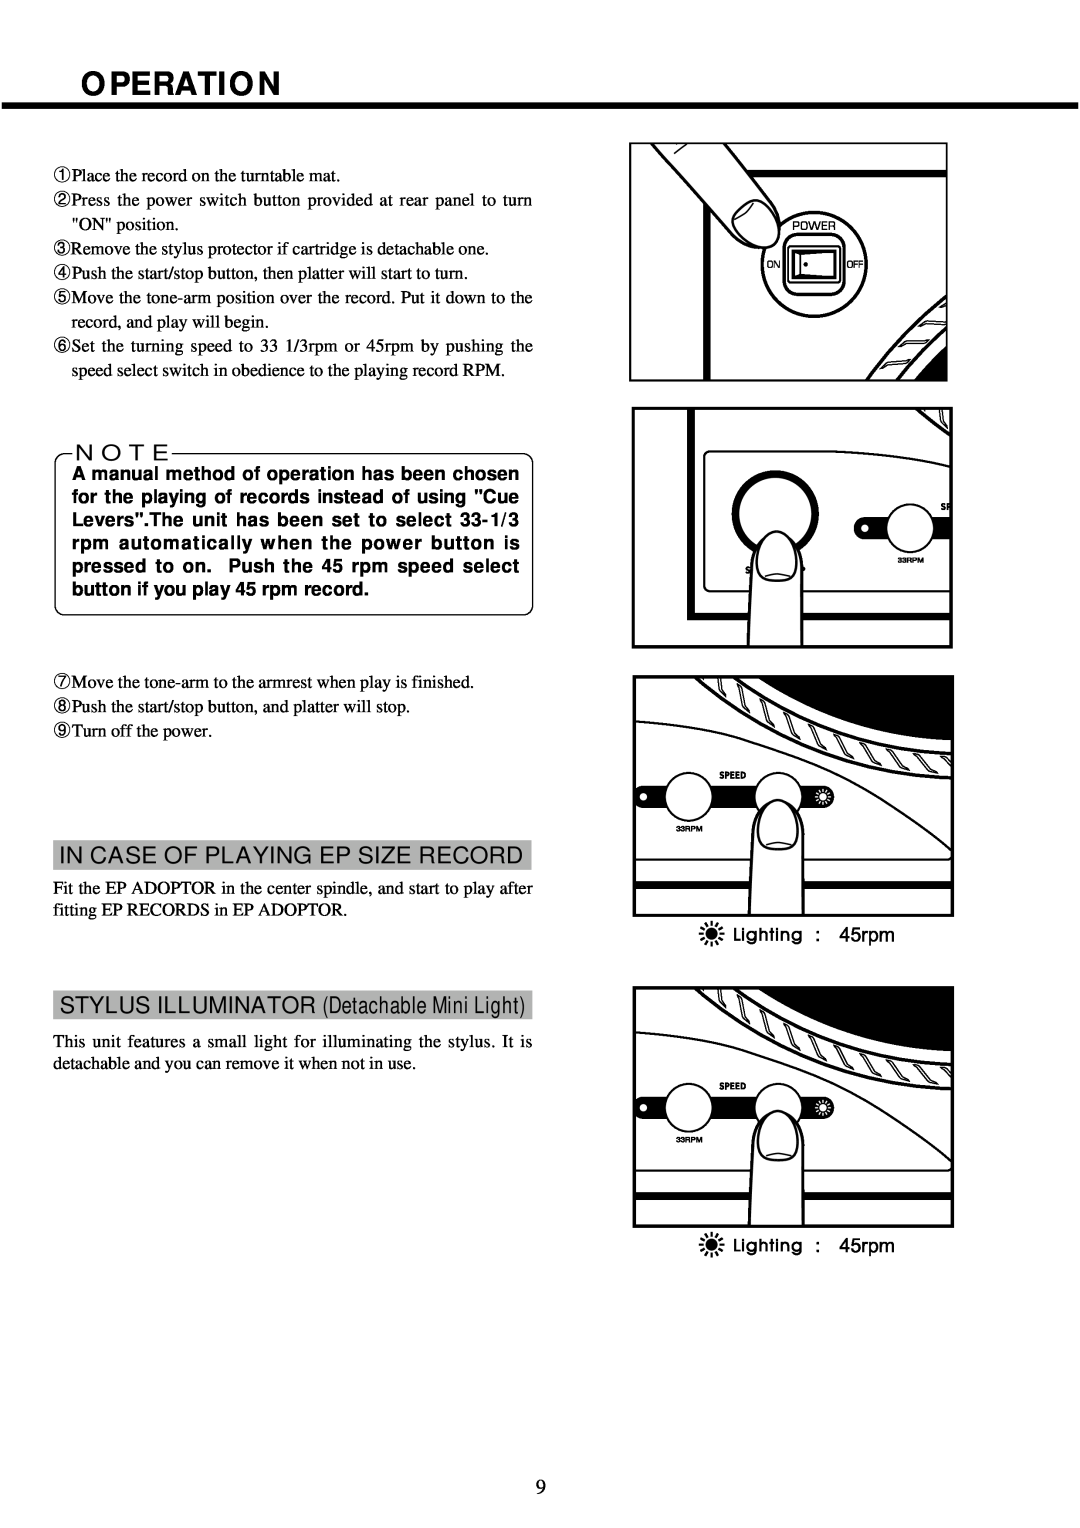 Vestax PDX-d3S owner manual Operation, In Case Of Playing Ep Size Record, STYLUS ILLUMINATOR Detachable Mini Light, N O T E 